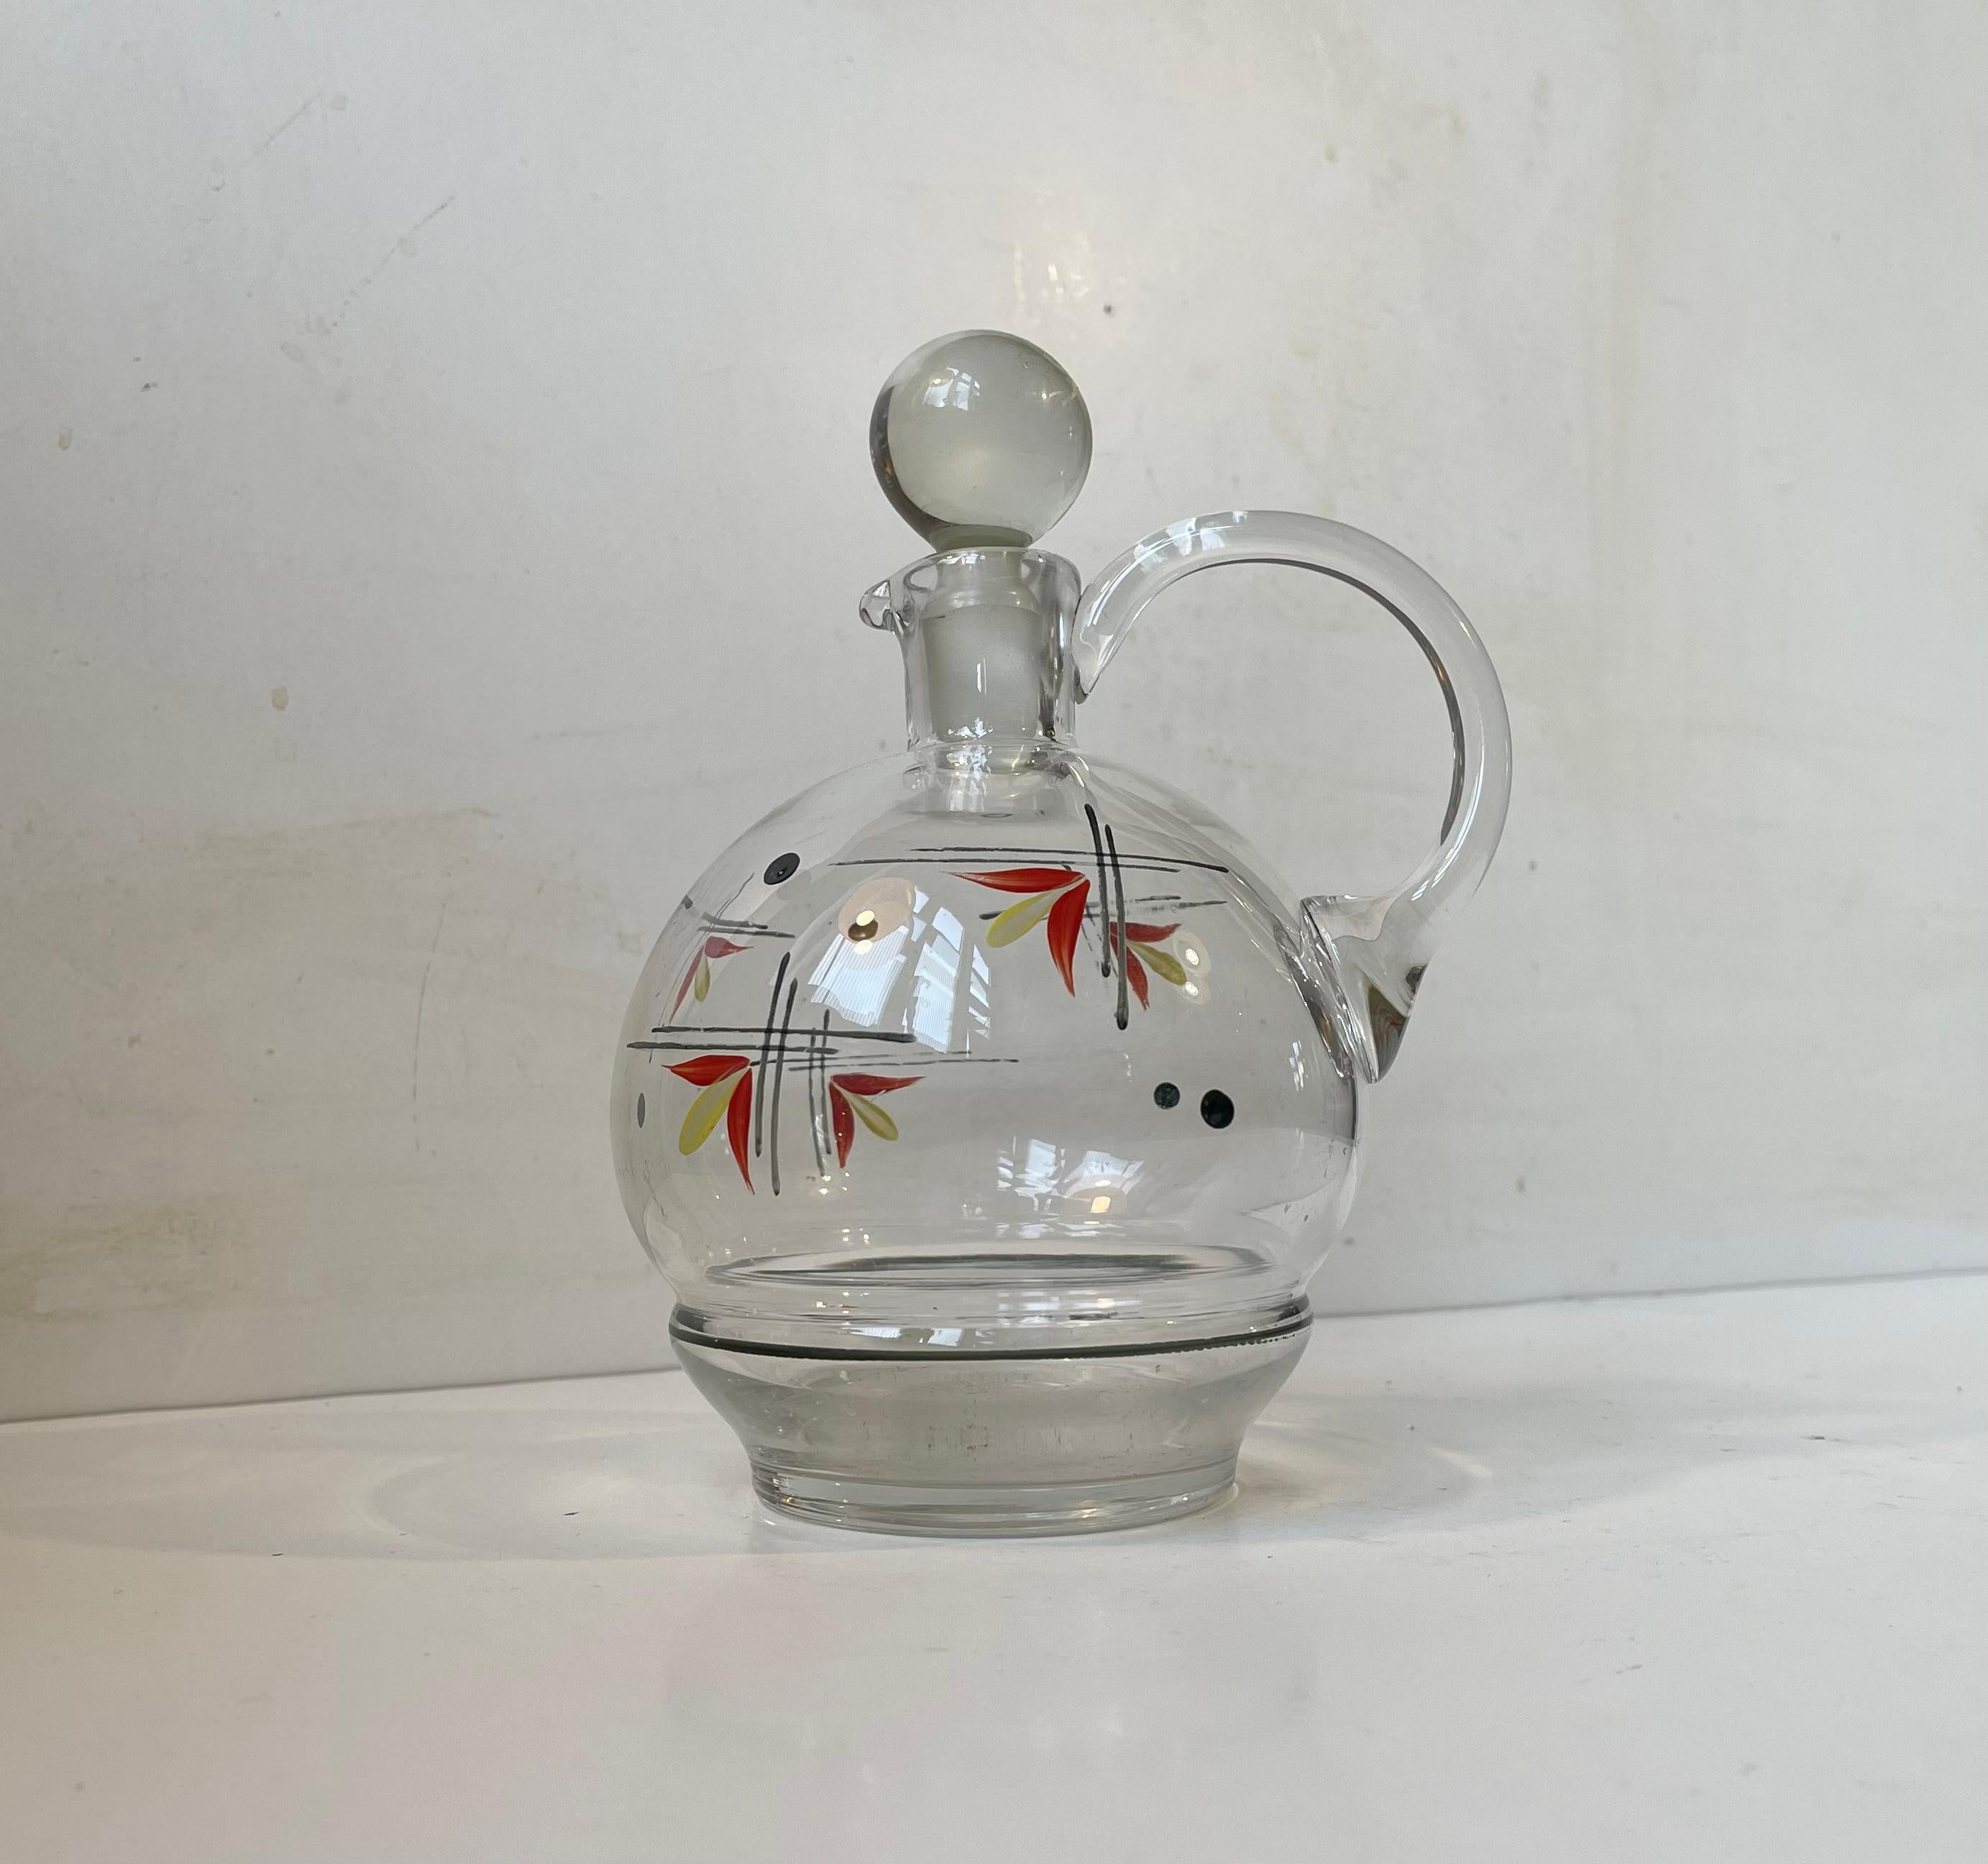 Art glass decanter with handle and hand-painted flowers in enamel lacquer. Designed by Jacob E. Bang, Arne Bang's kid brother, and made at Kastrup/Holmegaard in Denmark circa 1950-60. Measurements: H: 19 cm, D: 12 cm. Capacity: 0,6 liters approx.